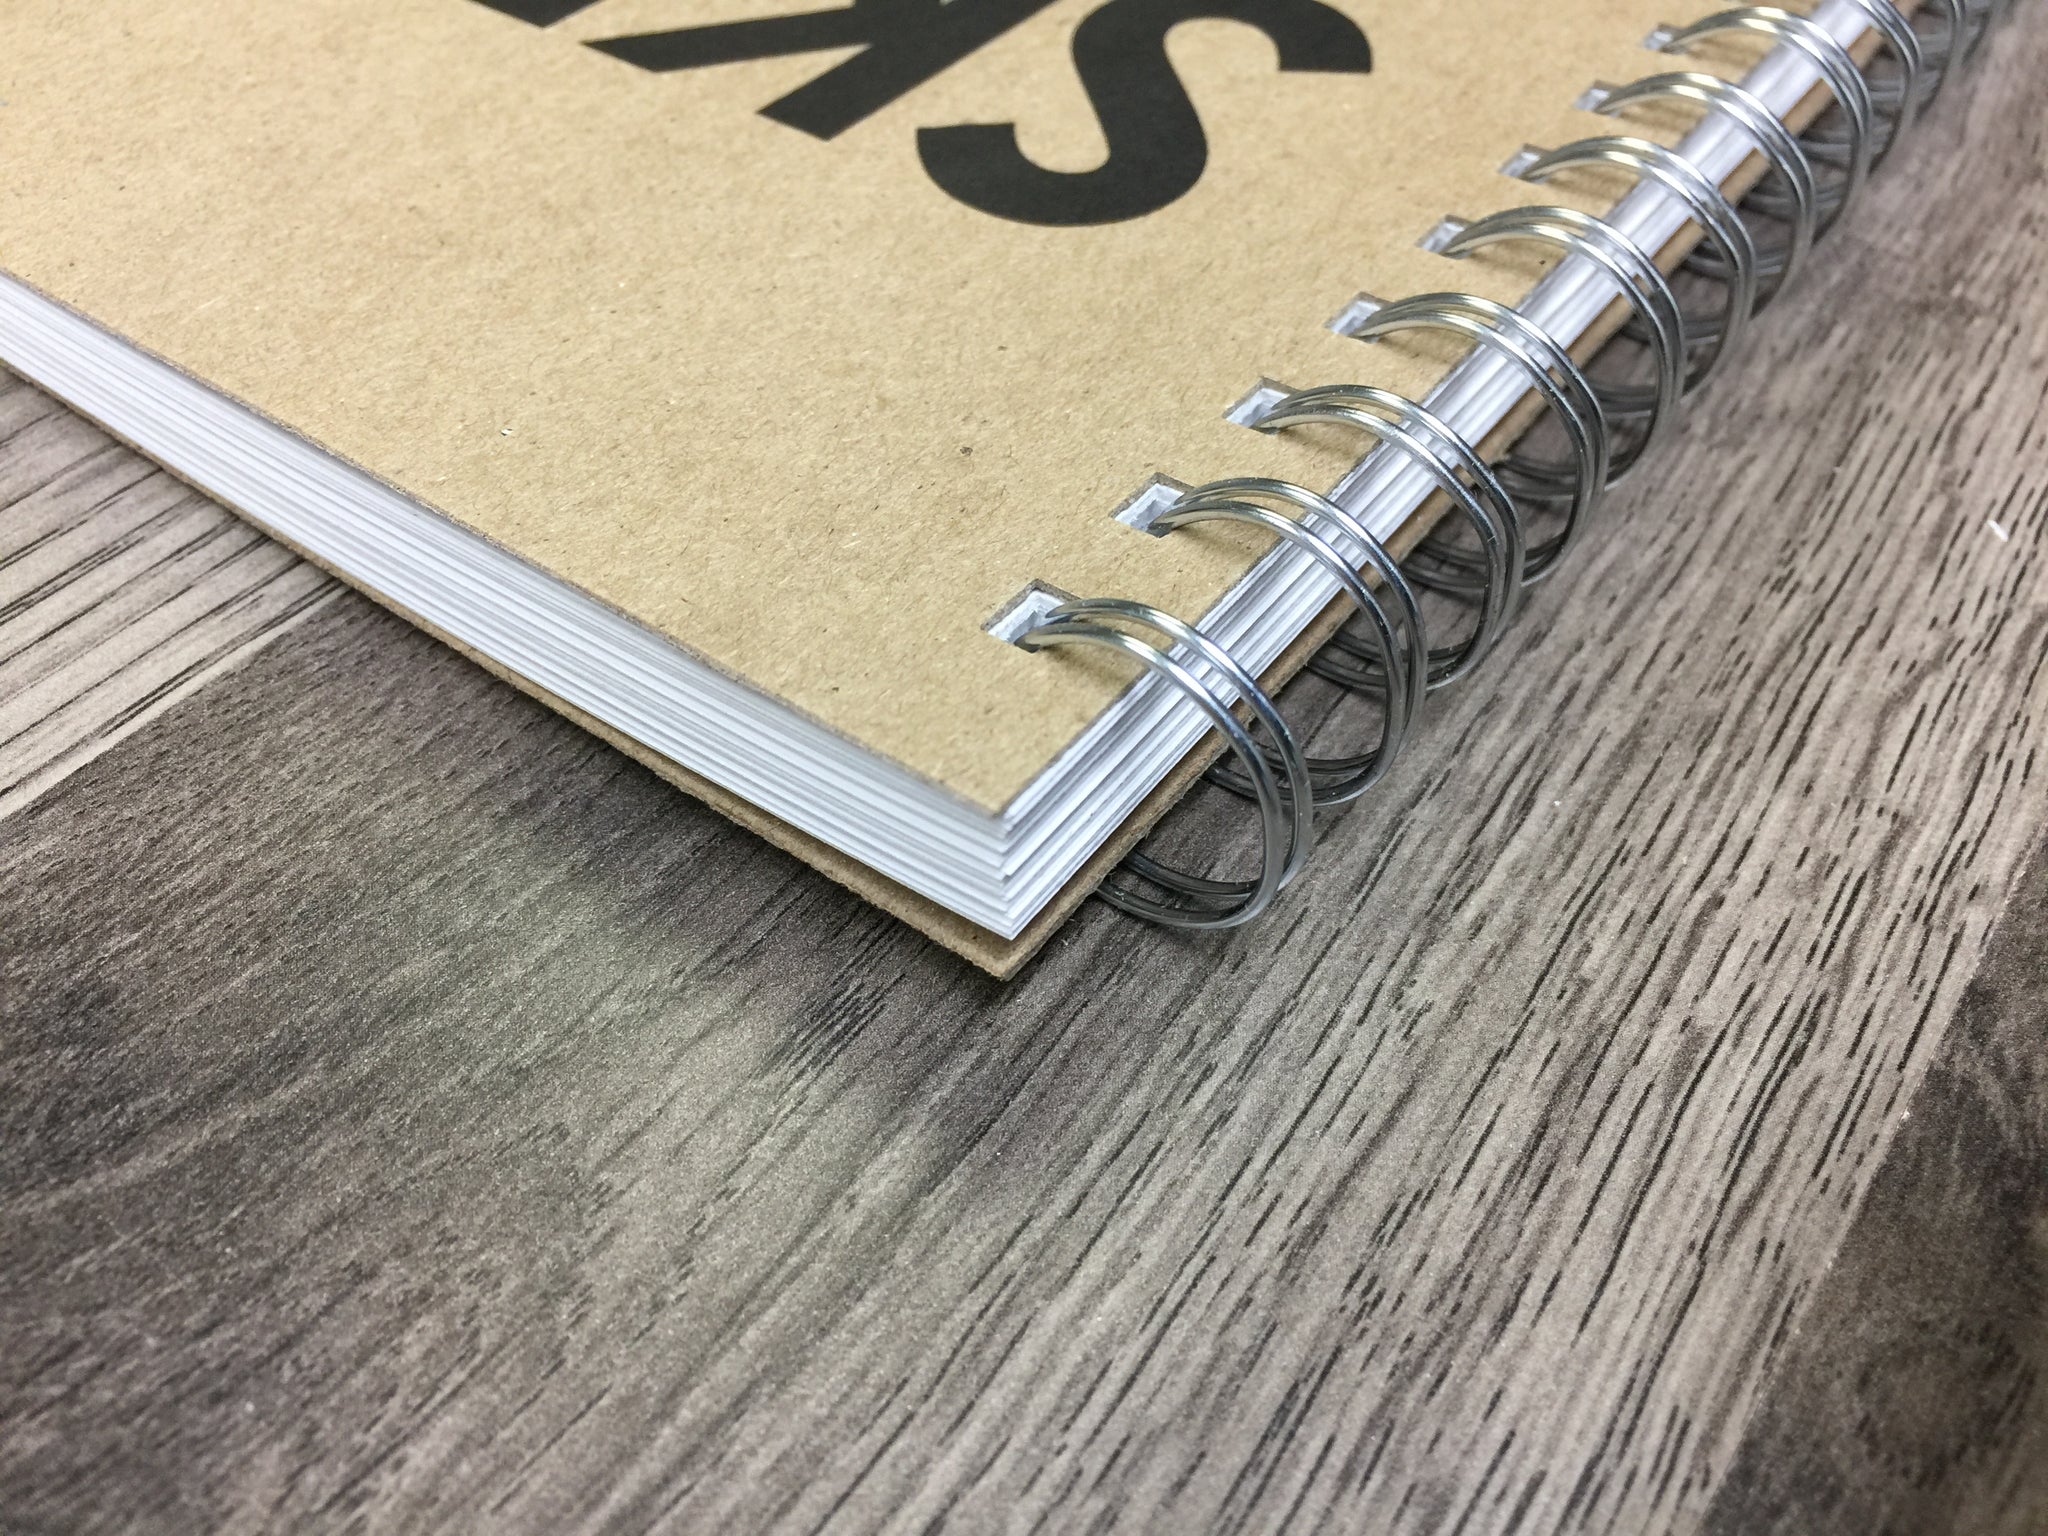 LAY FLAT sketchbook. Removable sheet, journal style CREATE book. Multi –  Design Ideation Studio